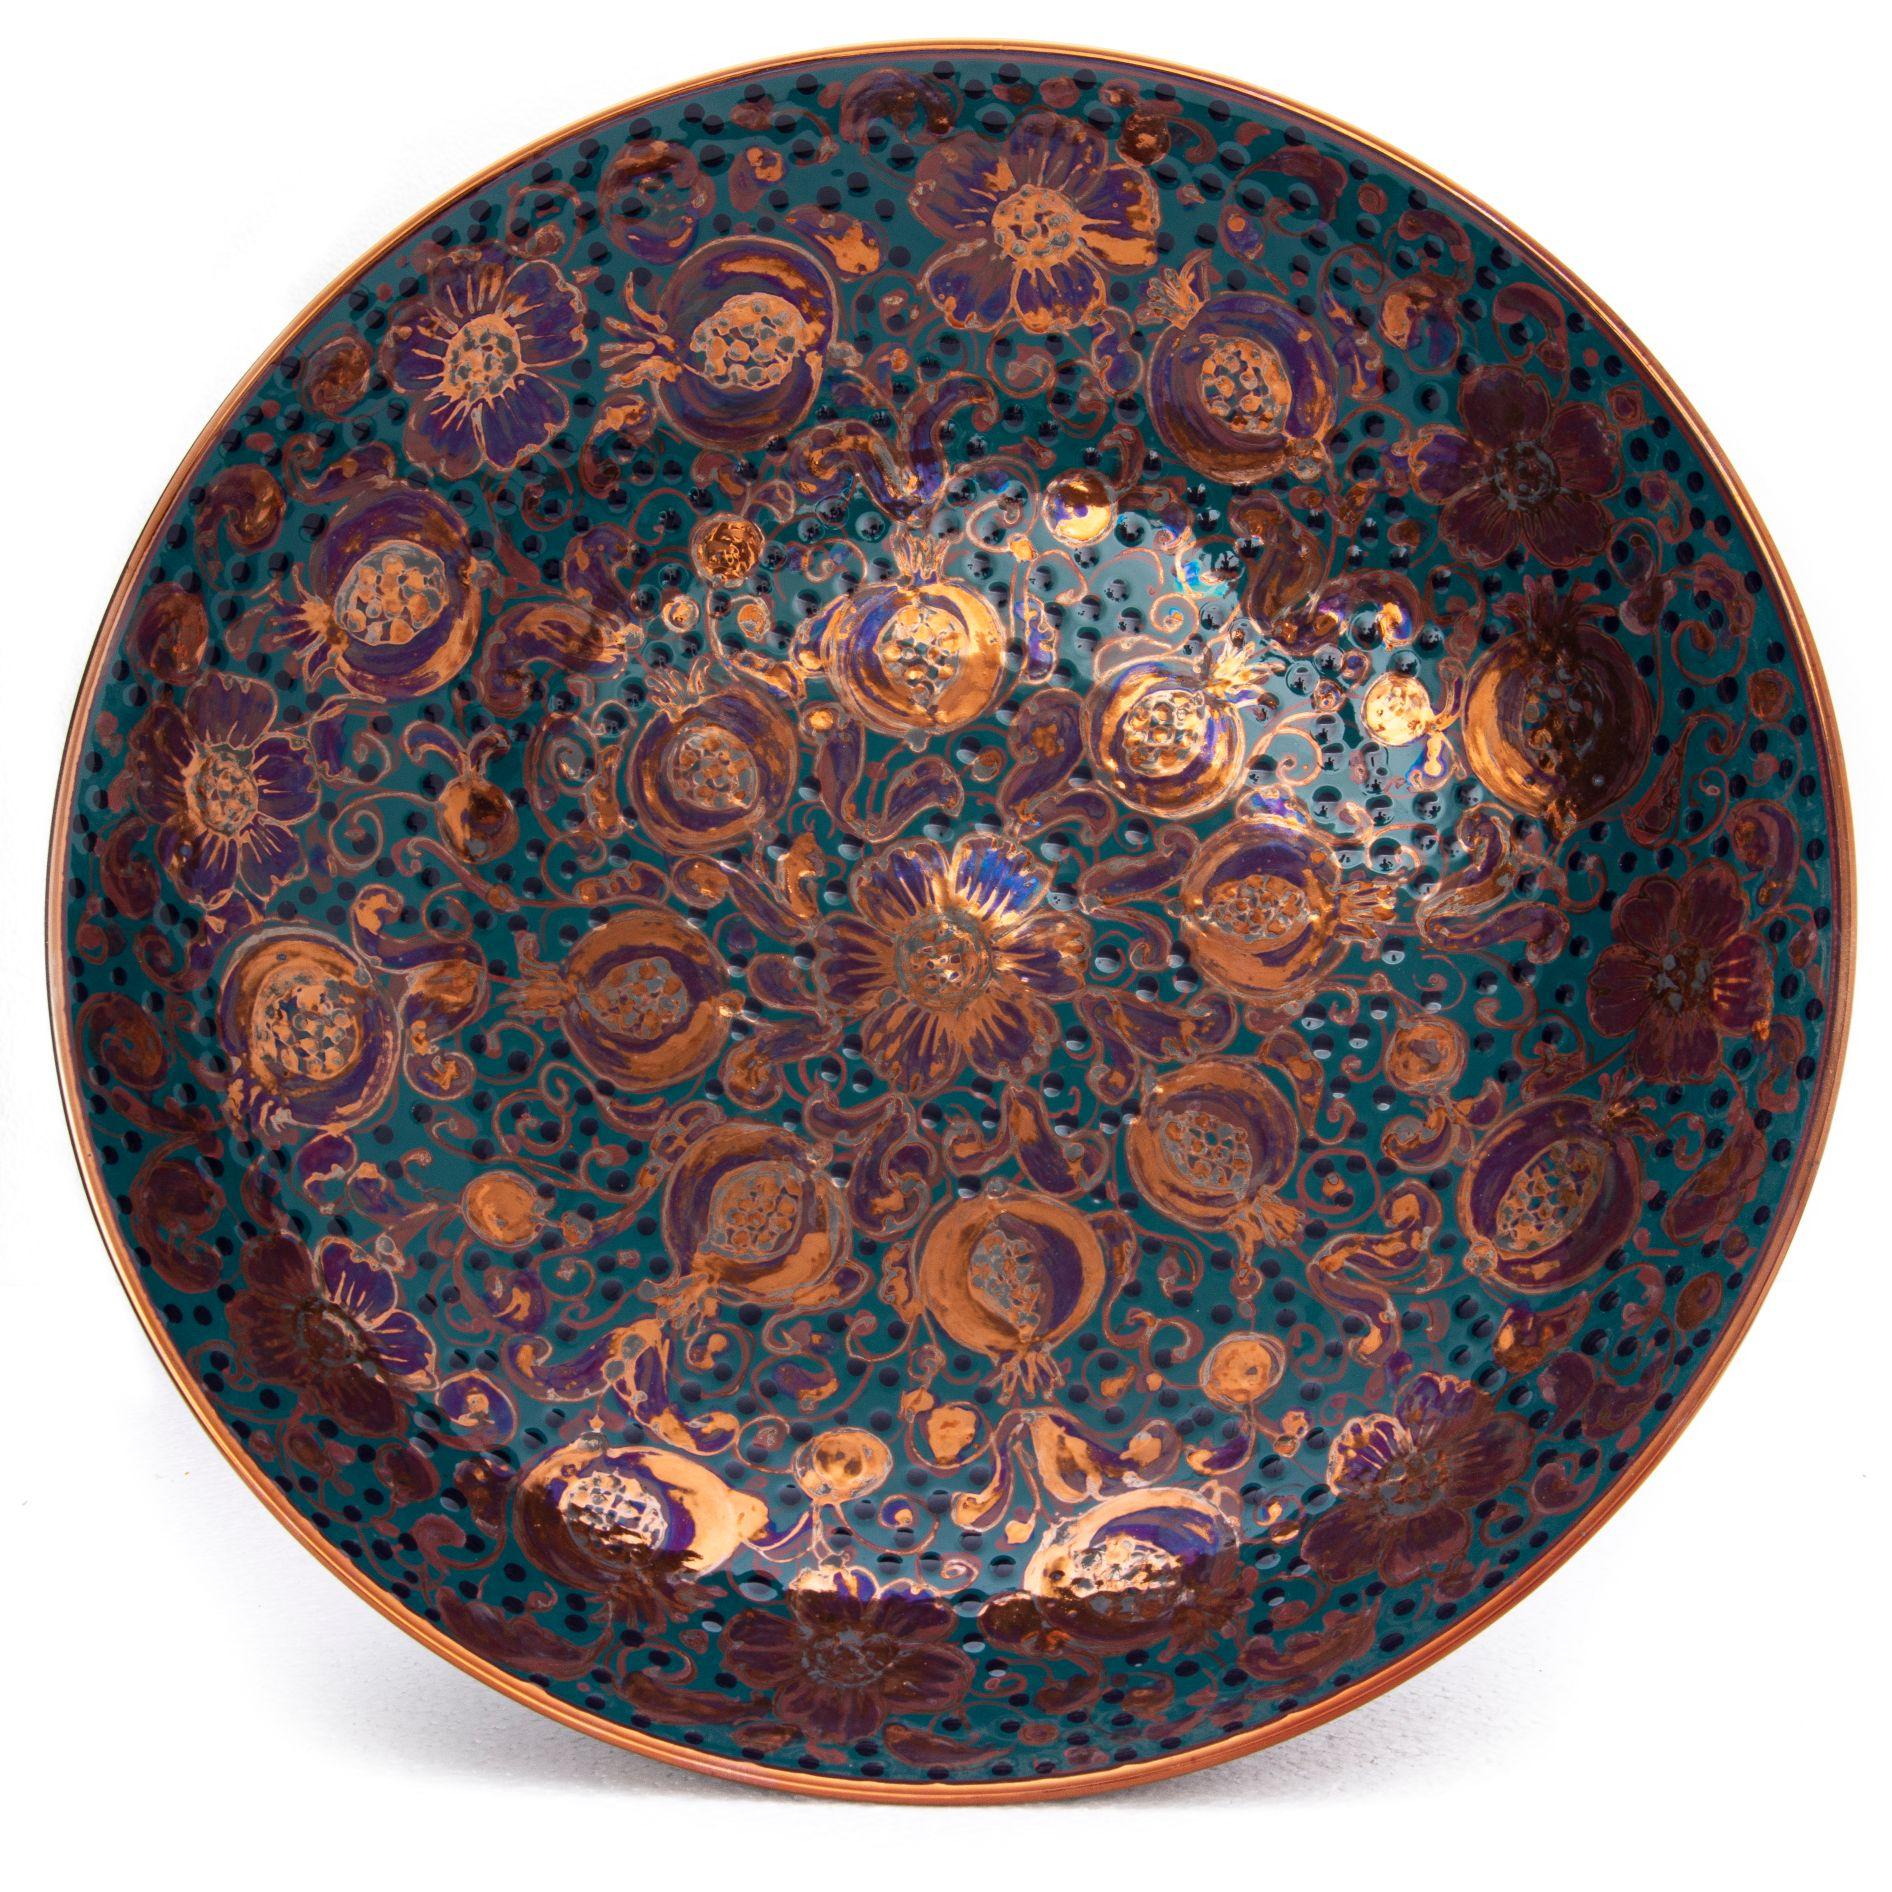 Large bowl with pomegranate decor, full-fire reduction faience earthenware 40 cm diameter, unique piece, 2020

Bottega Vignoli is a brand of artistic ceramics based in Faenza, one of the most representative ceramic production centres in Italy.